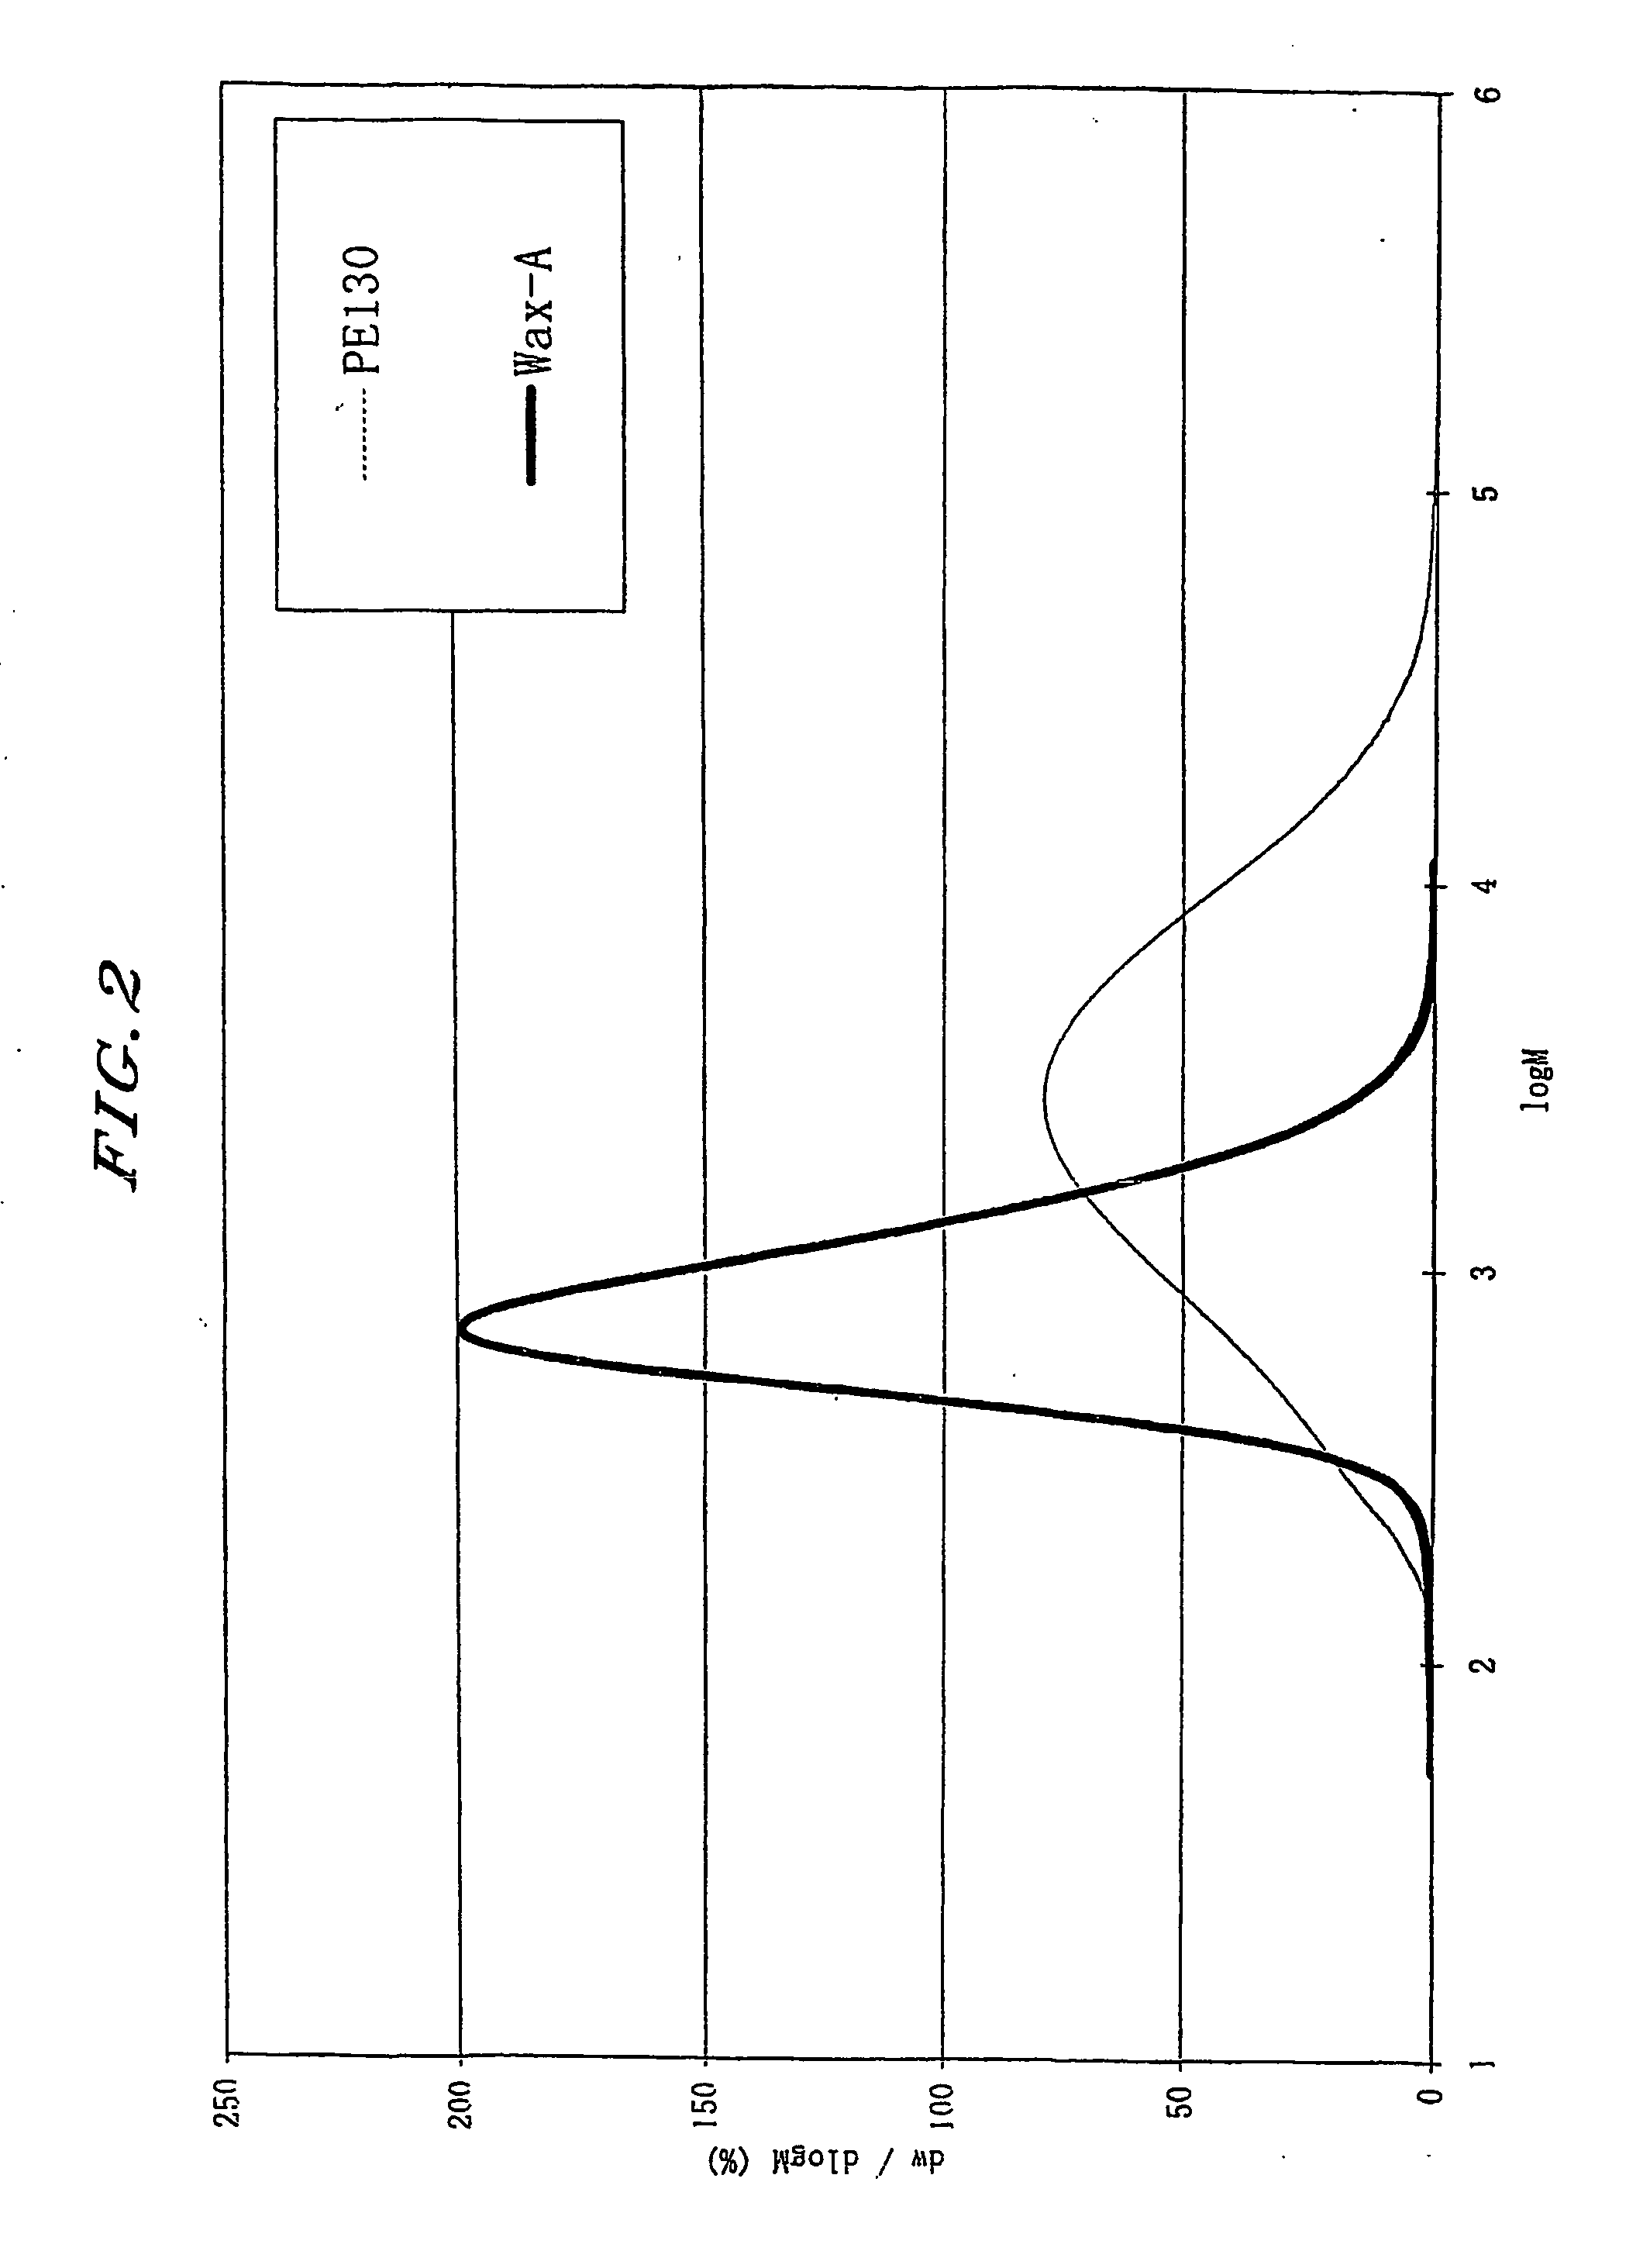 Electrostatic toner composition to enhance copy quality by improved fusing and method of manufacturing same